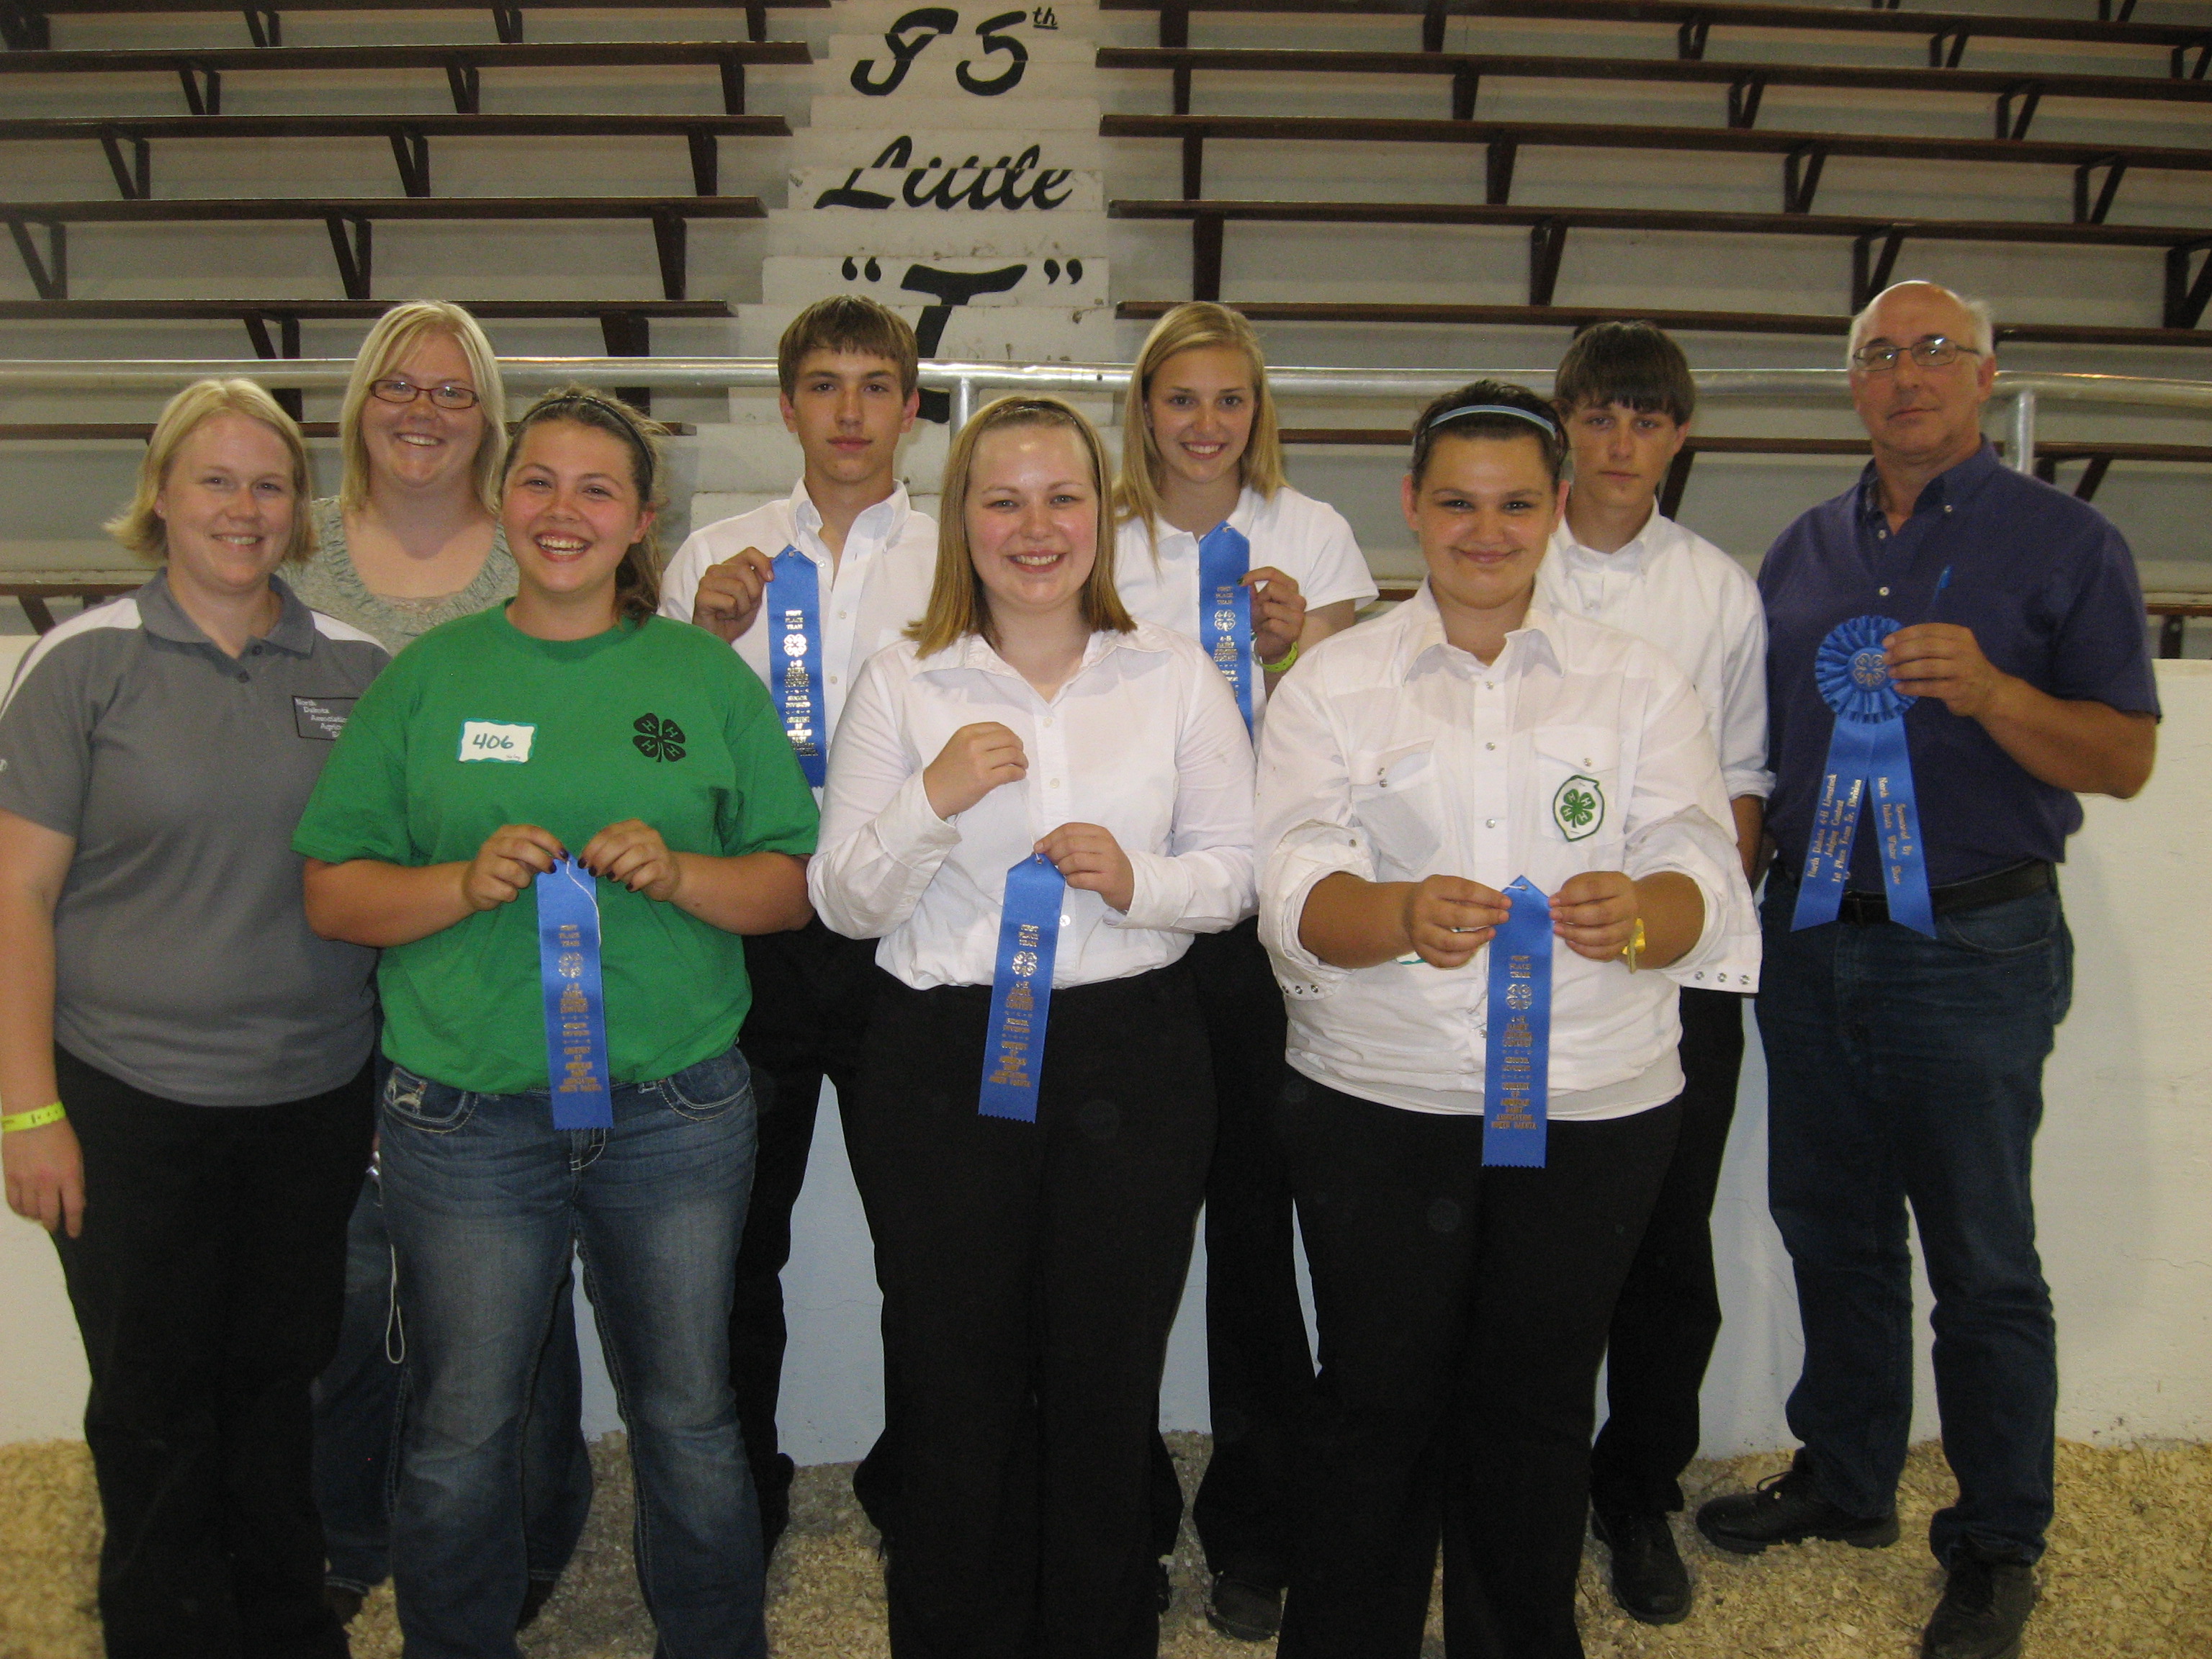 Foster County's 4-H dairy judging team placed first in the senior division of the state 4-H dairy judging contest. Pictured are (back row, left to right): Jenny VandeHoven, coach; team members Casey Murphy, Madison Wendel and Seth Hazer; and Joel Lemer, coach; (front row, left to right): Missy Hansen, coach; and team members Haley Koenig, Maggie Mattson and Shawna Fetch.